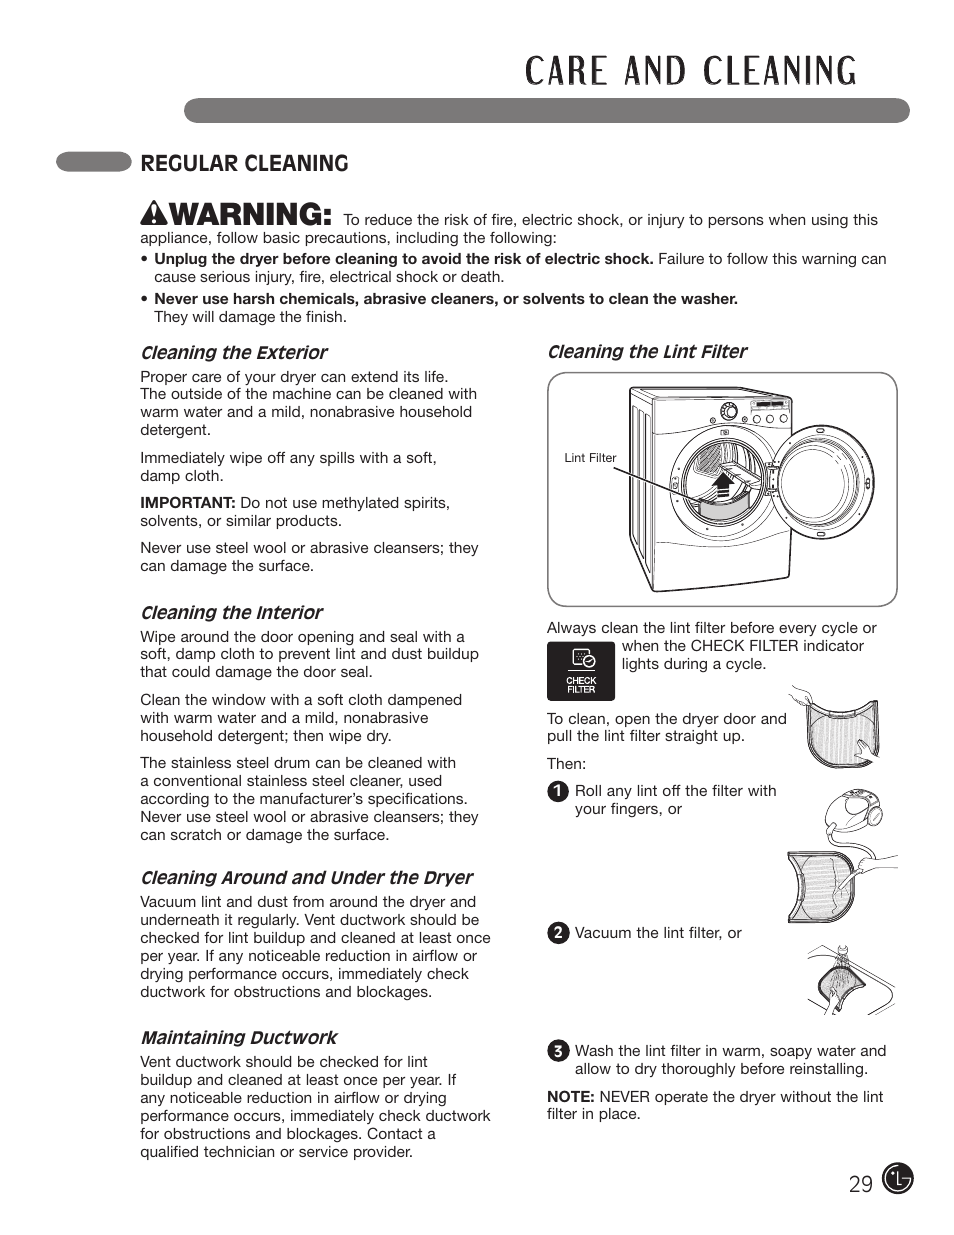 W warning, Regular cleaning | LG D5966W User Manual | Page 29 / 80